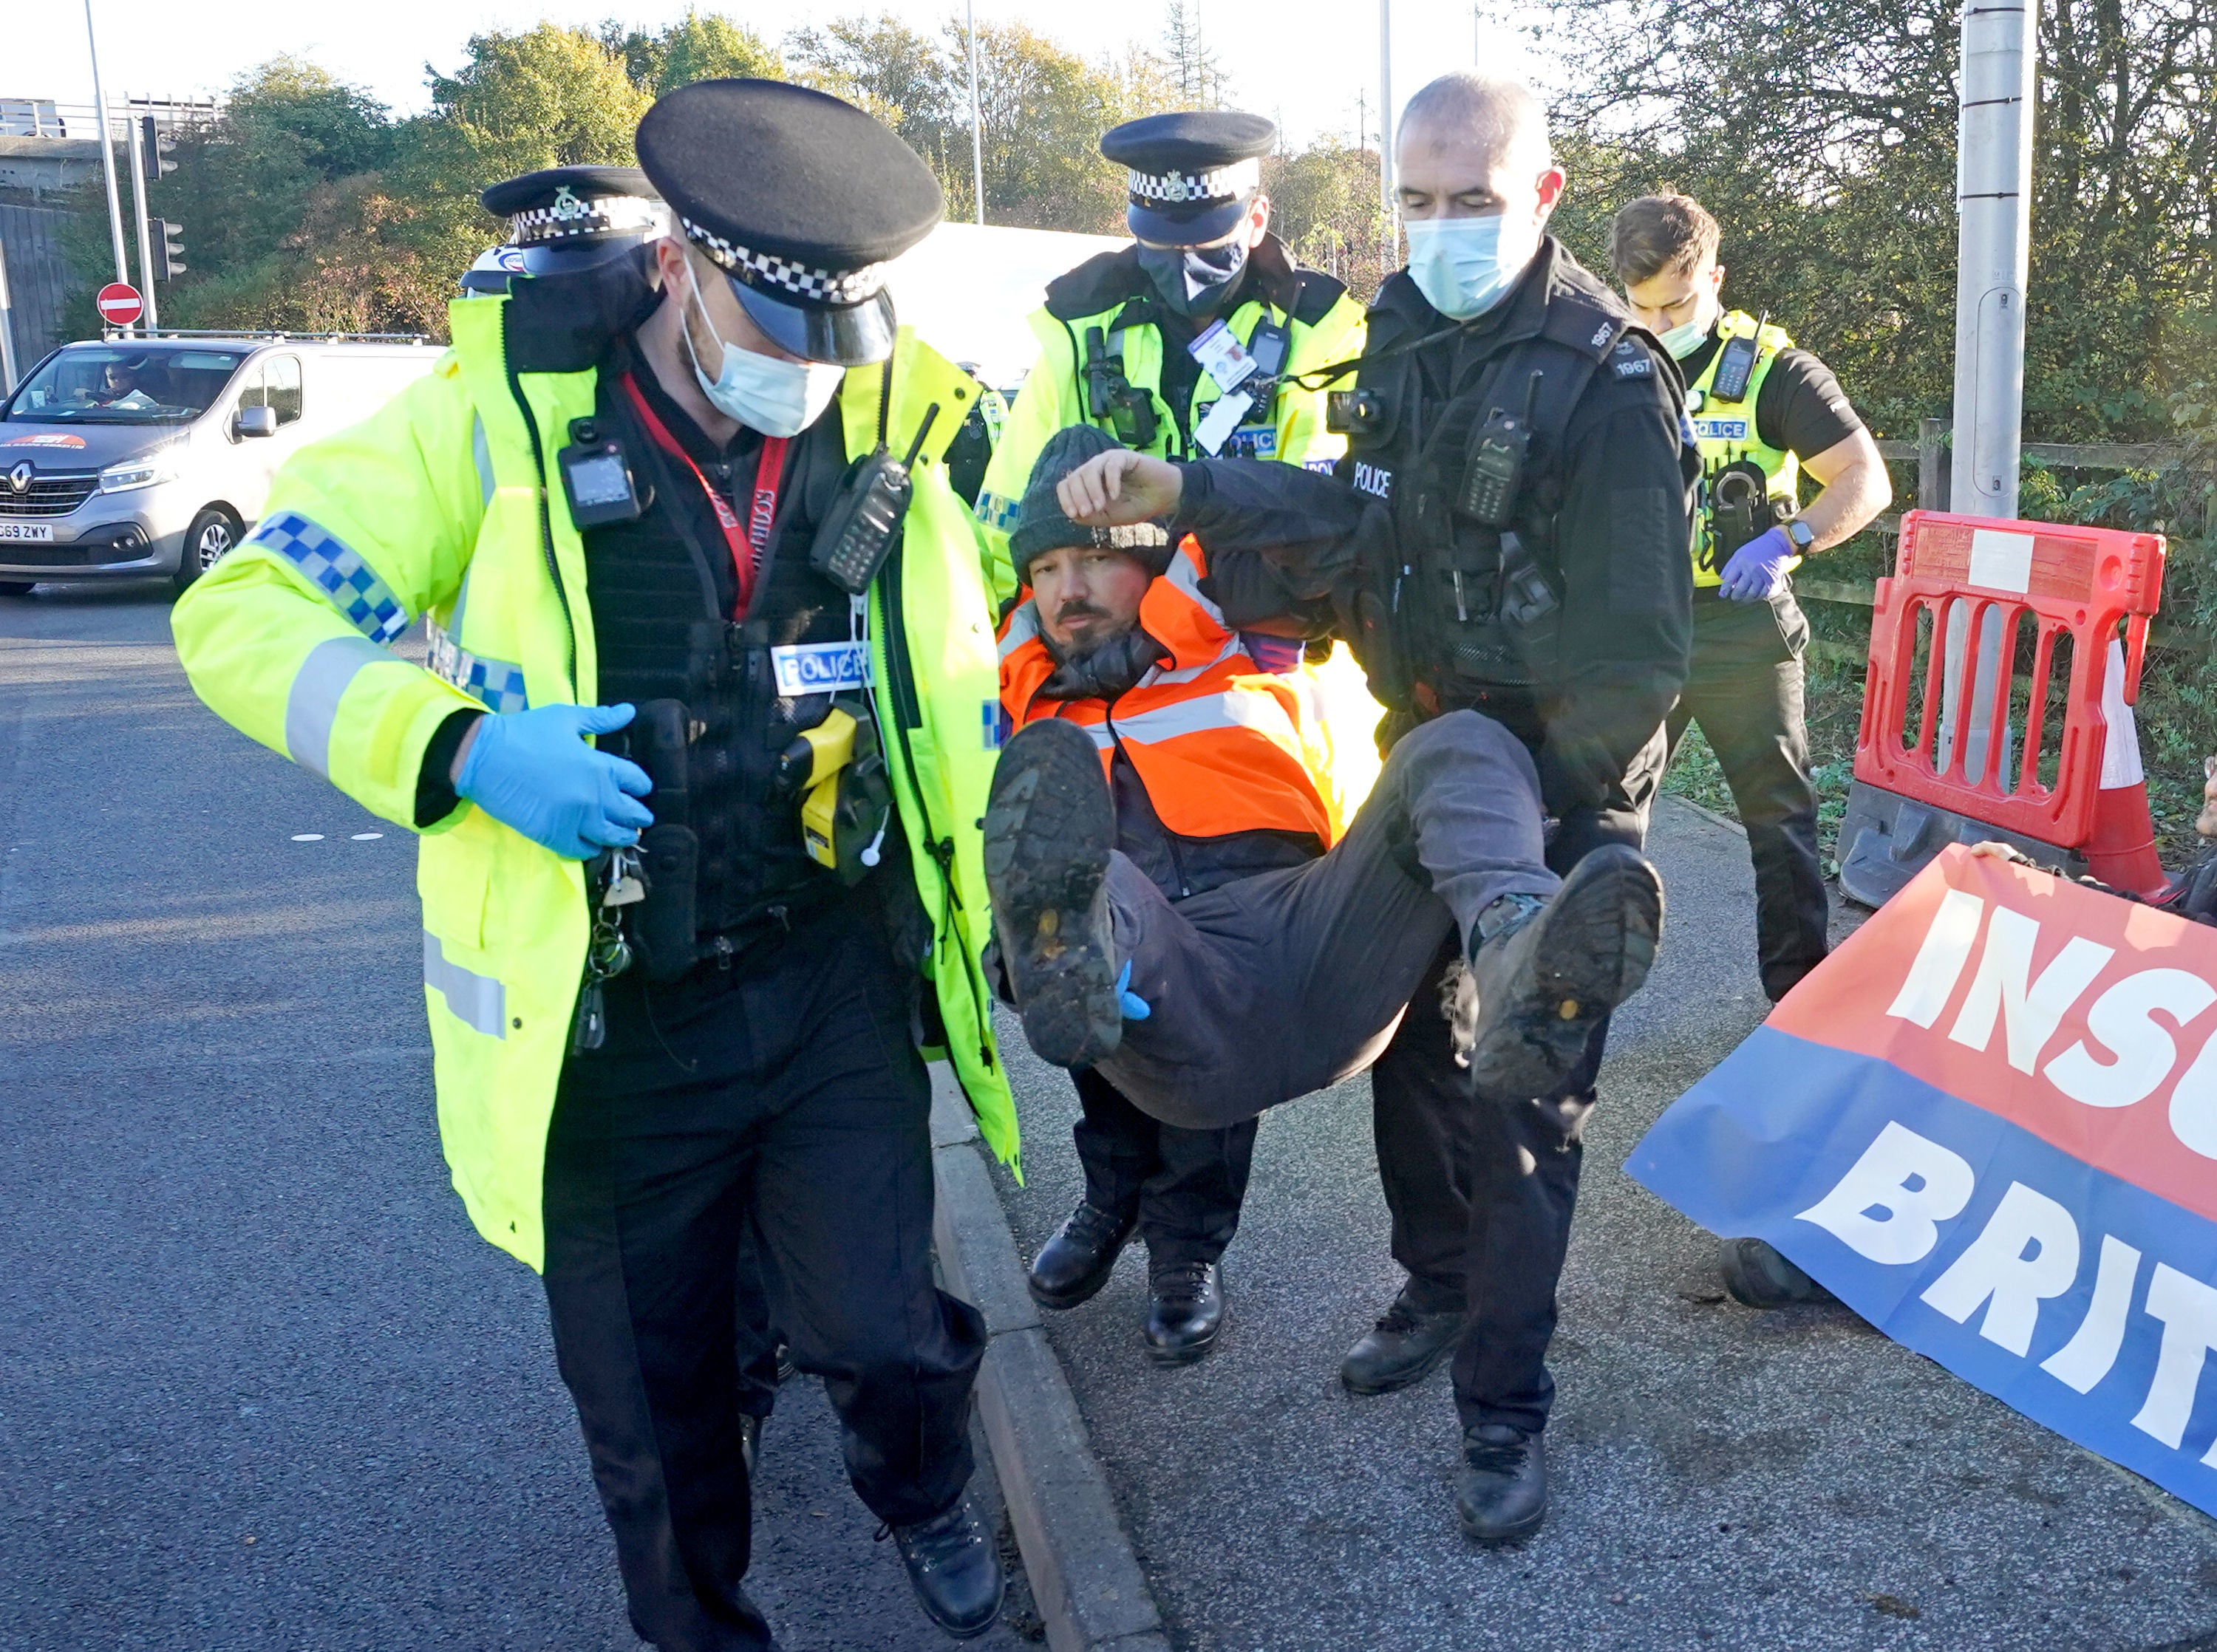 Police officers detain a protester at an Insulate Britain roadblock near to the the South Mimms roundabout at the junction of the M25 and A1.